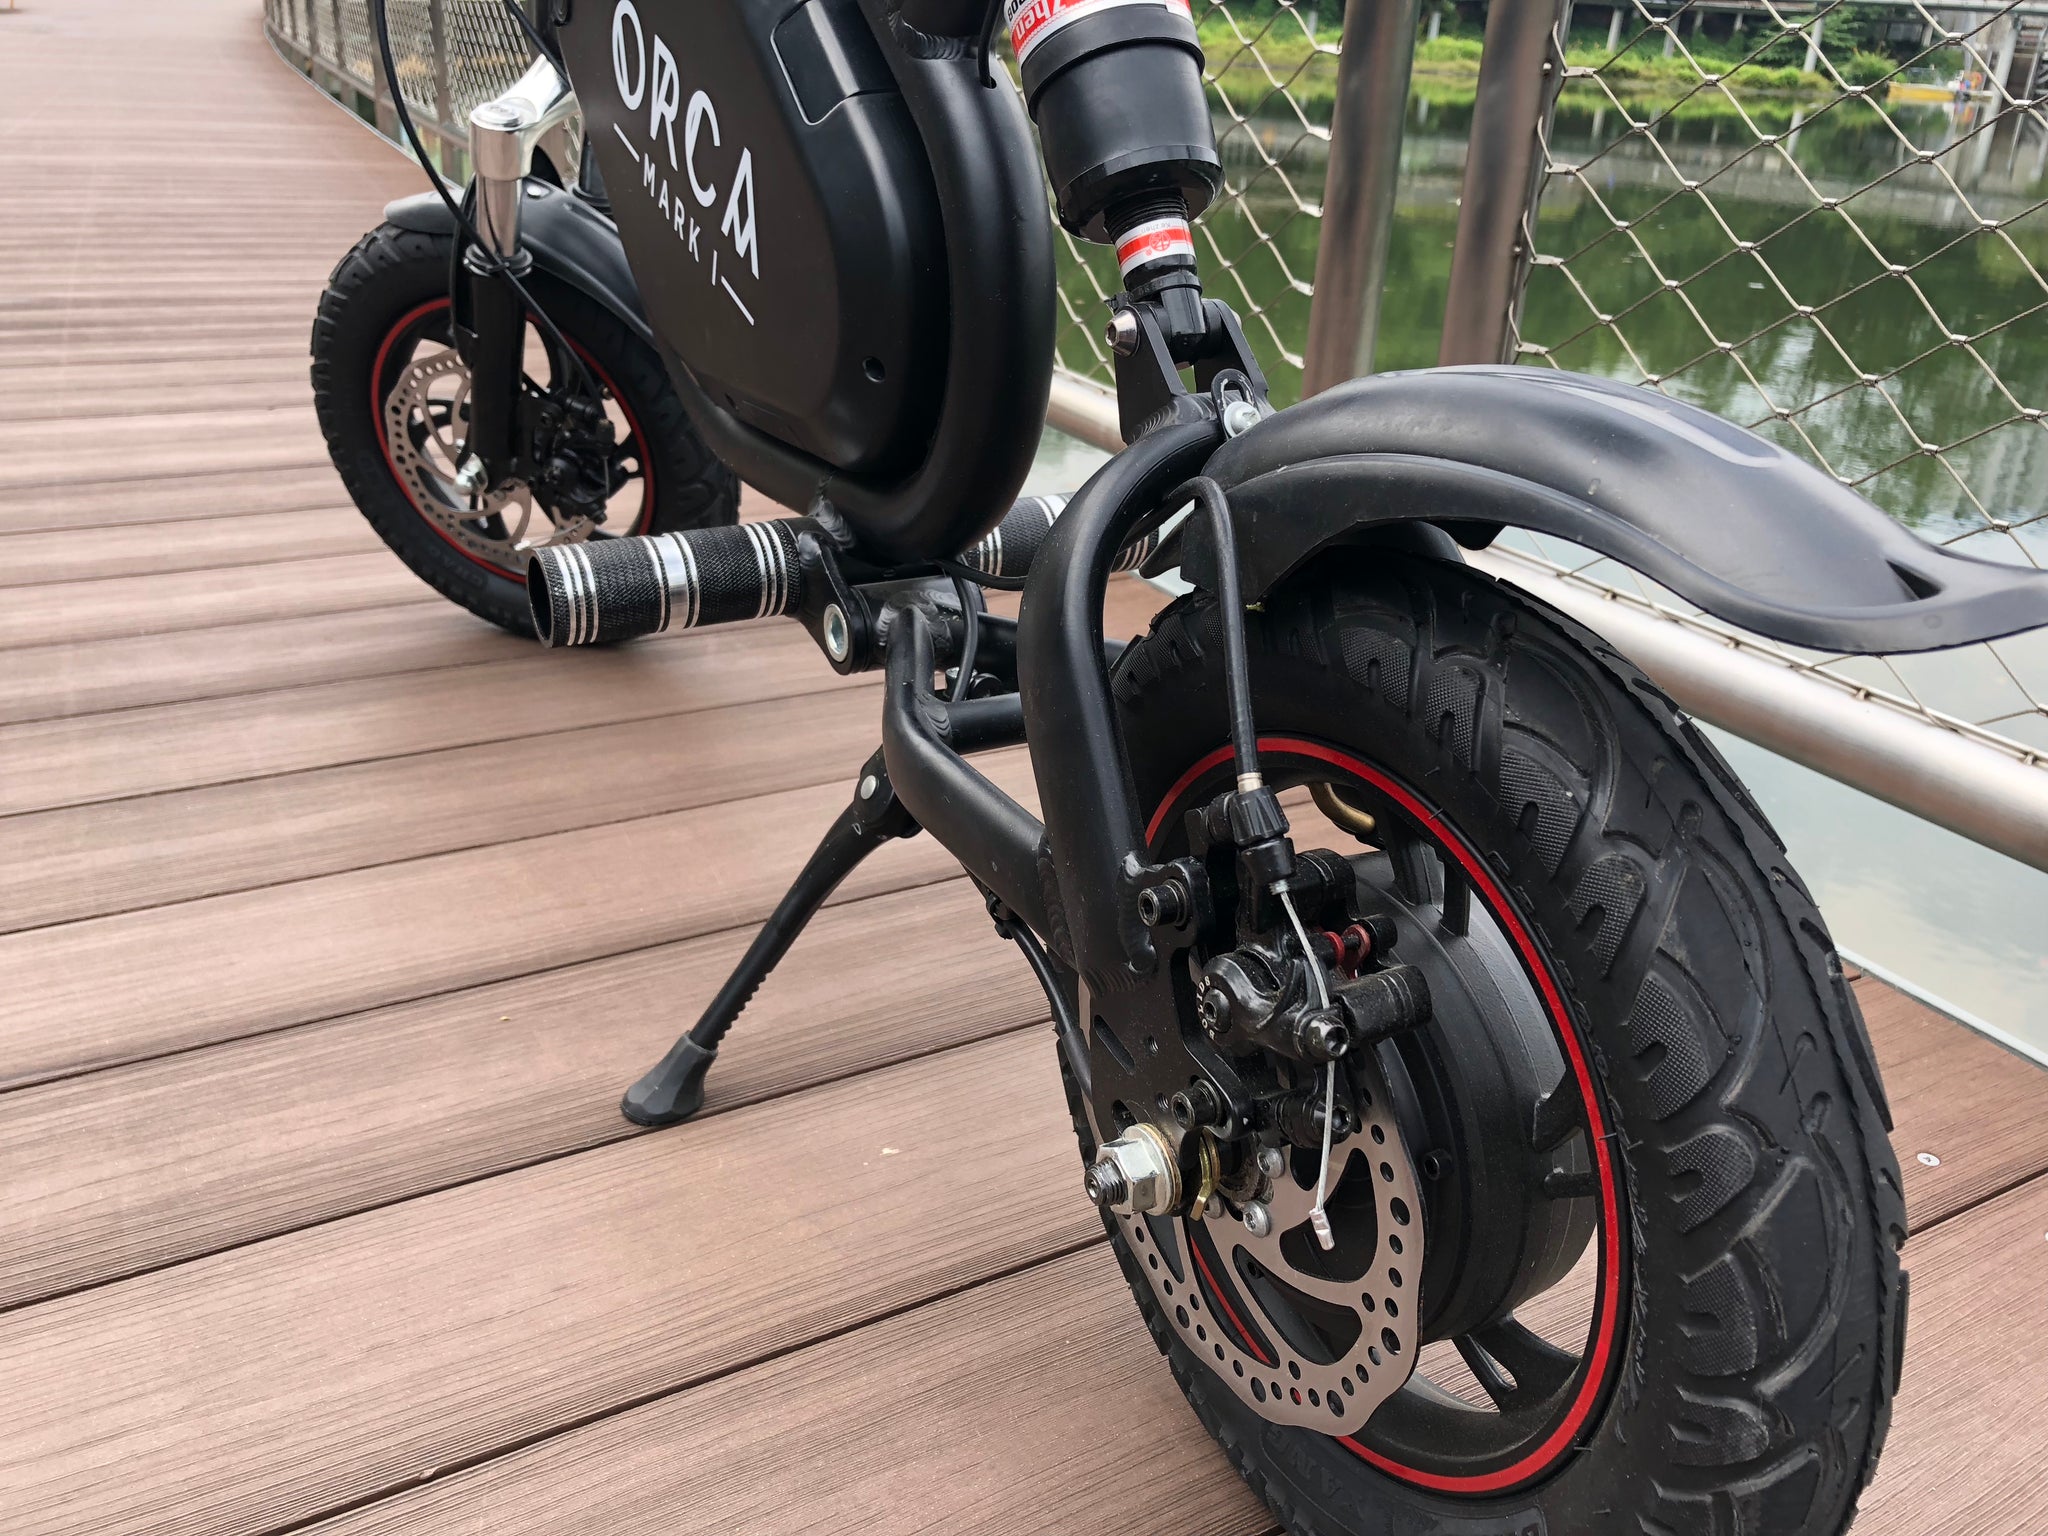 ORCA Mark I electric scooter front and rear disc brakes